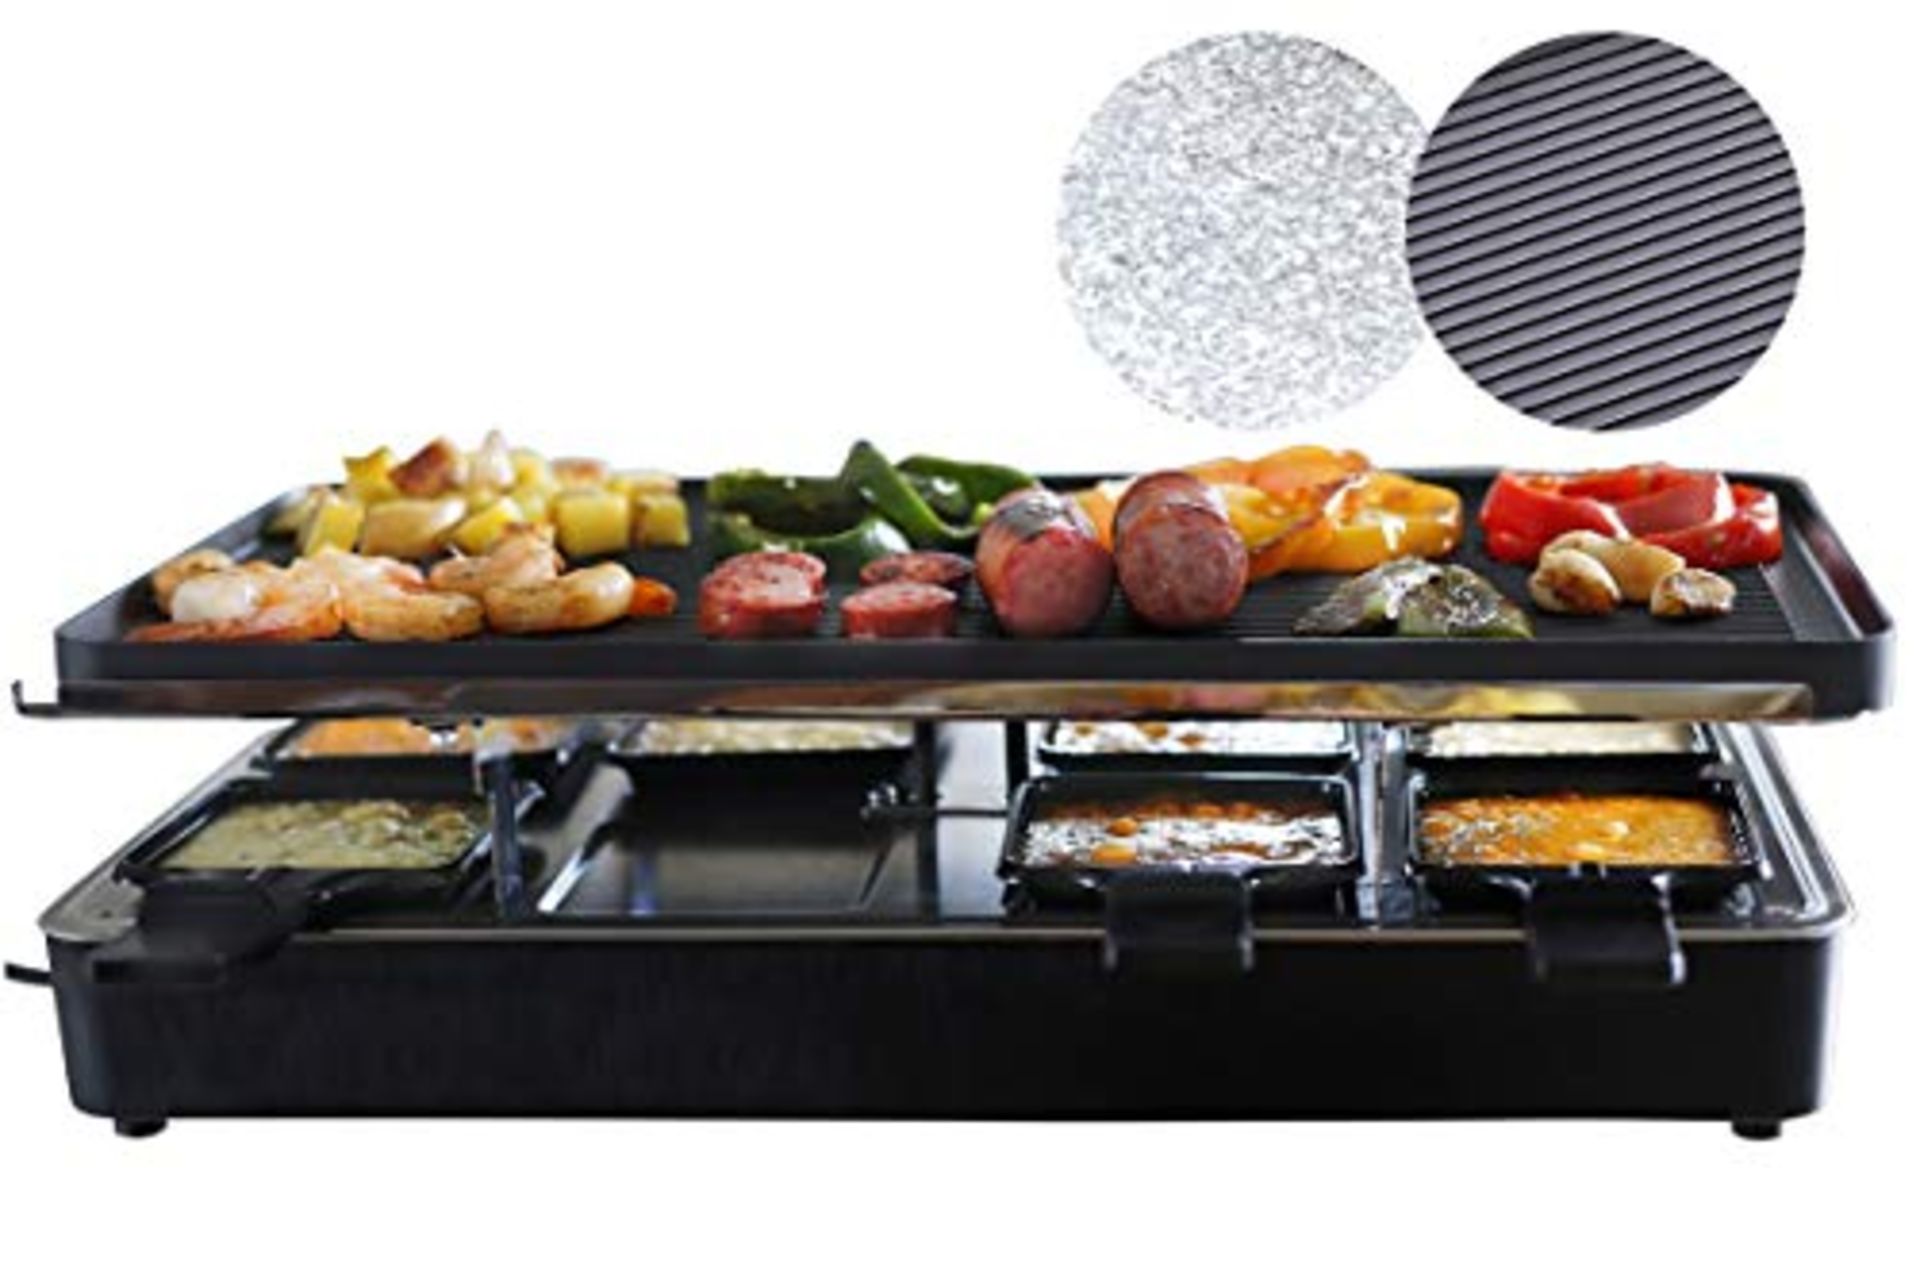 RRP £51.36 Milliard Raclette Grill for 8 - Include Granite Cooking Stone - Image 2 of 3